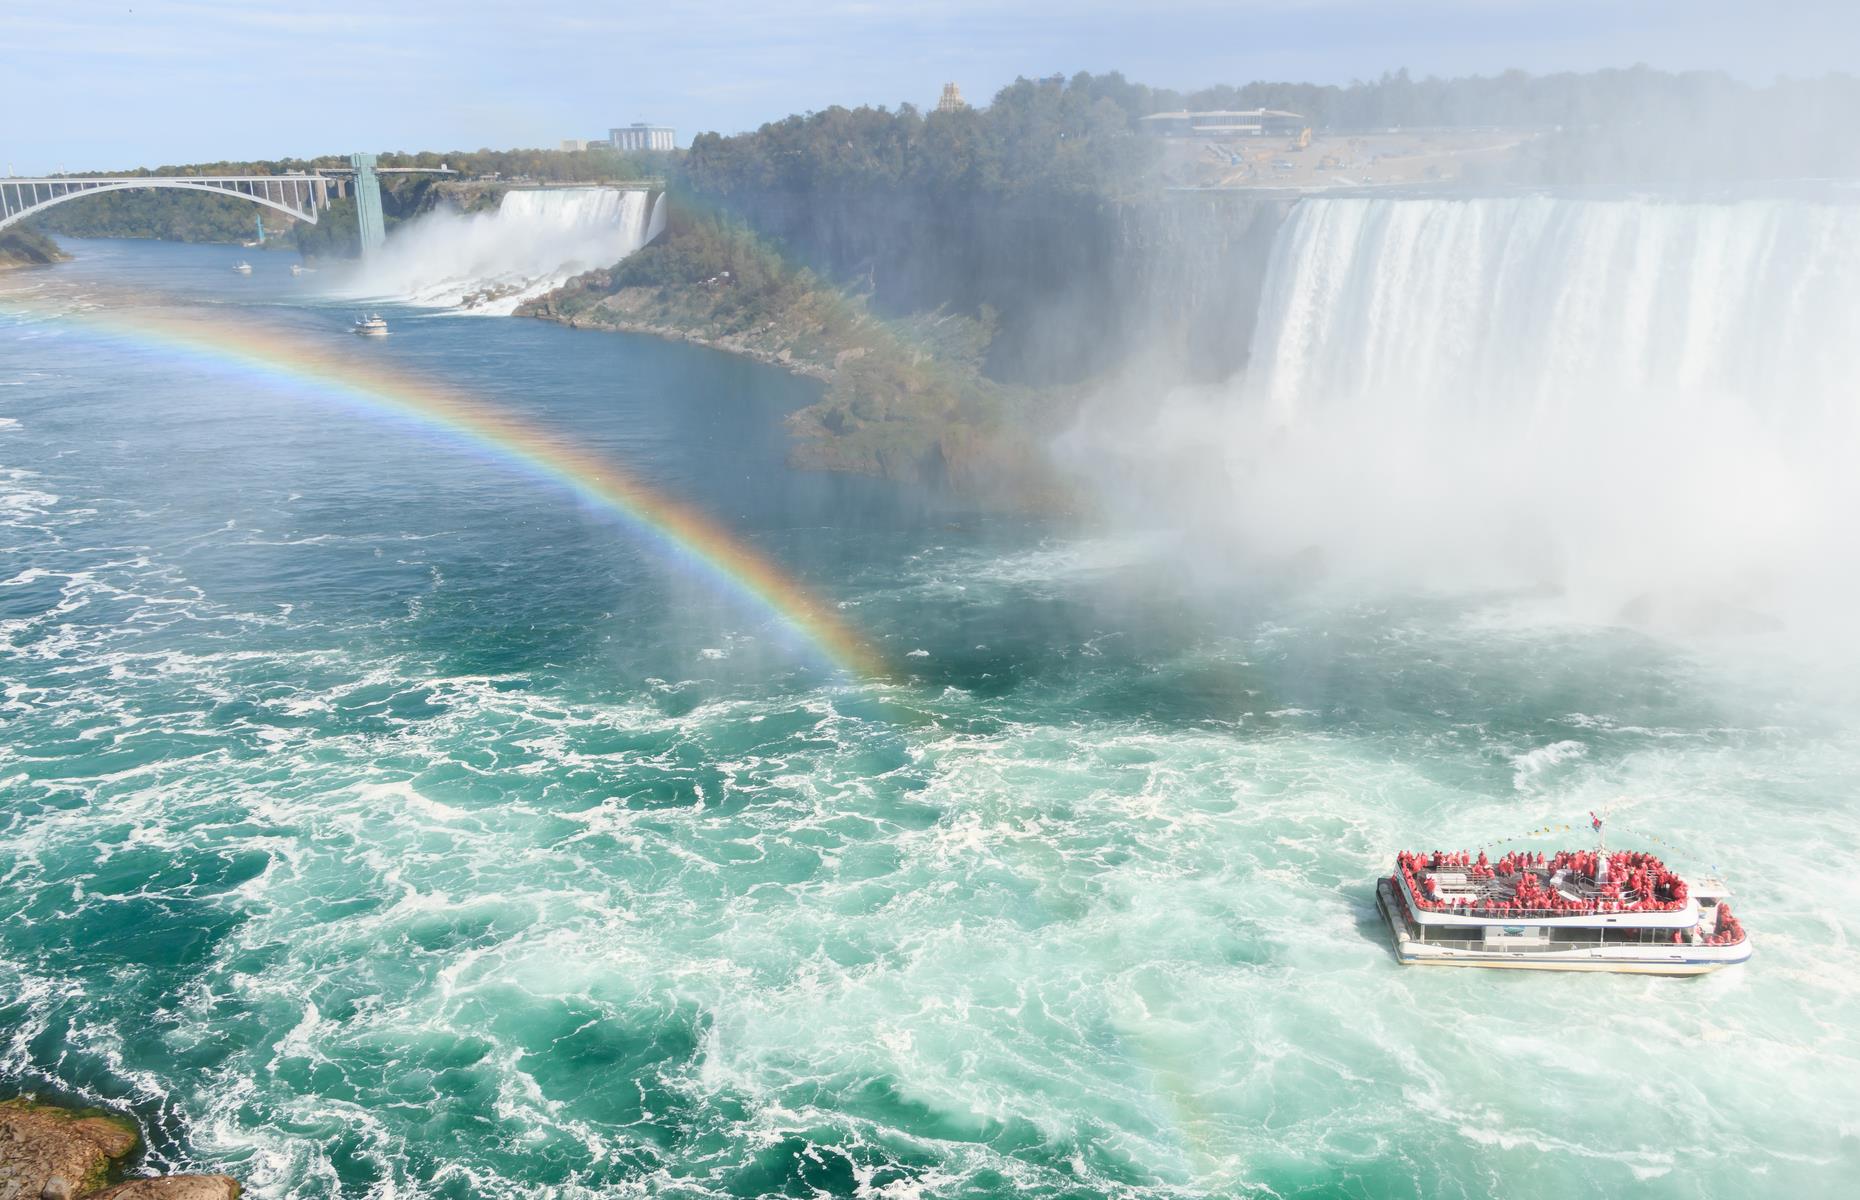 <p>Perhaps the most famous waterfalls in the world make up Niagara Falls, on the border between the US and Canada. New York State is home to the smallest of the three – American Falls and Bridal Veil Falls – but arguably boasts the best vistas. Soak up the views and the water on the popular <a href="https://www.maidofthemist.com/">Maid of the Mist</a> boat tour, which starts and ends on the US side.</p>